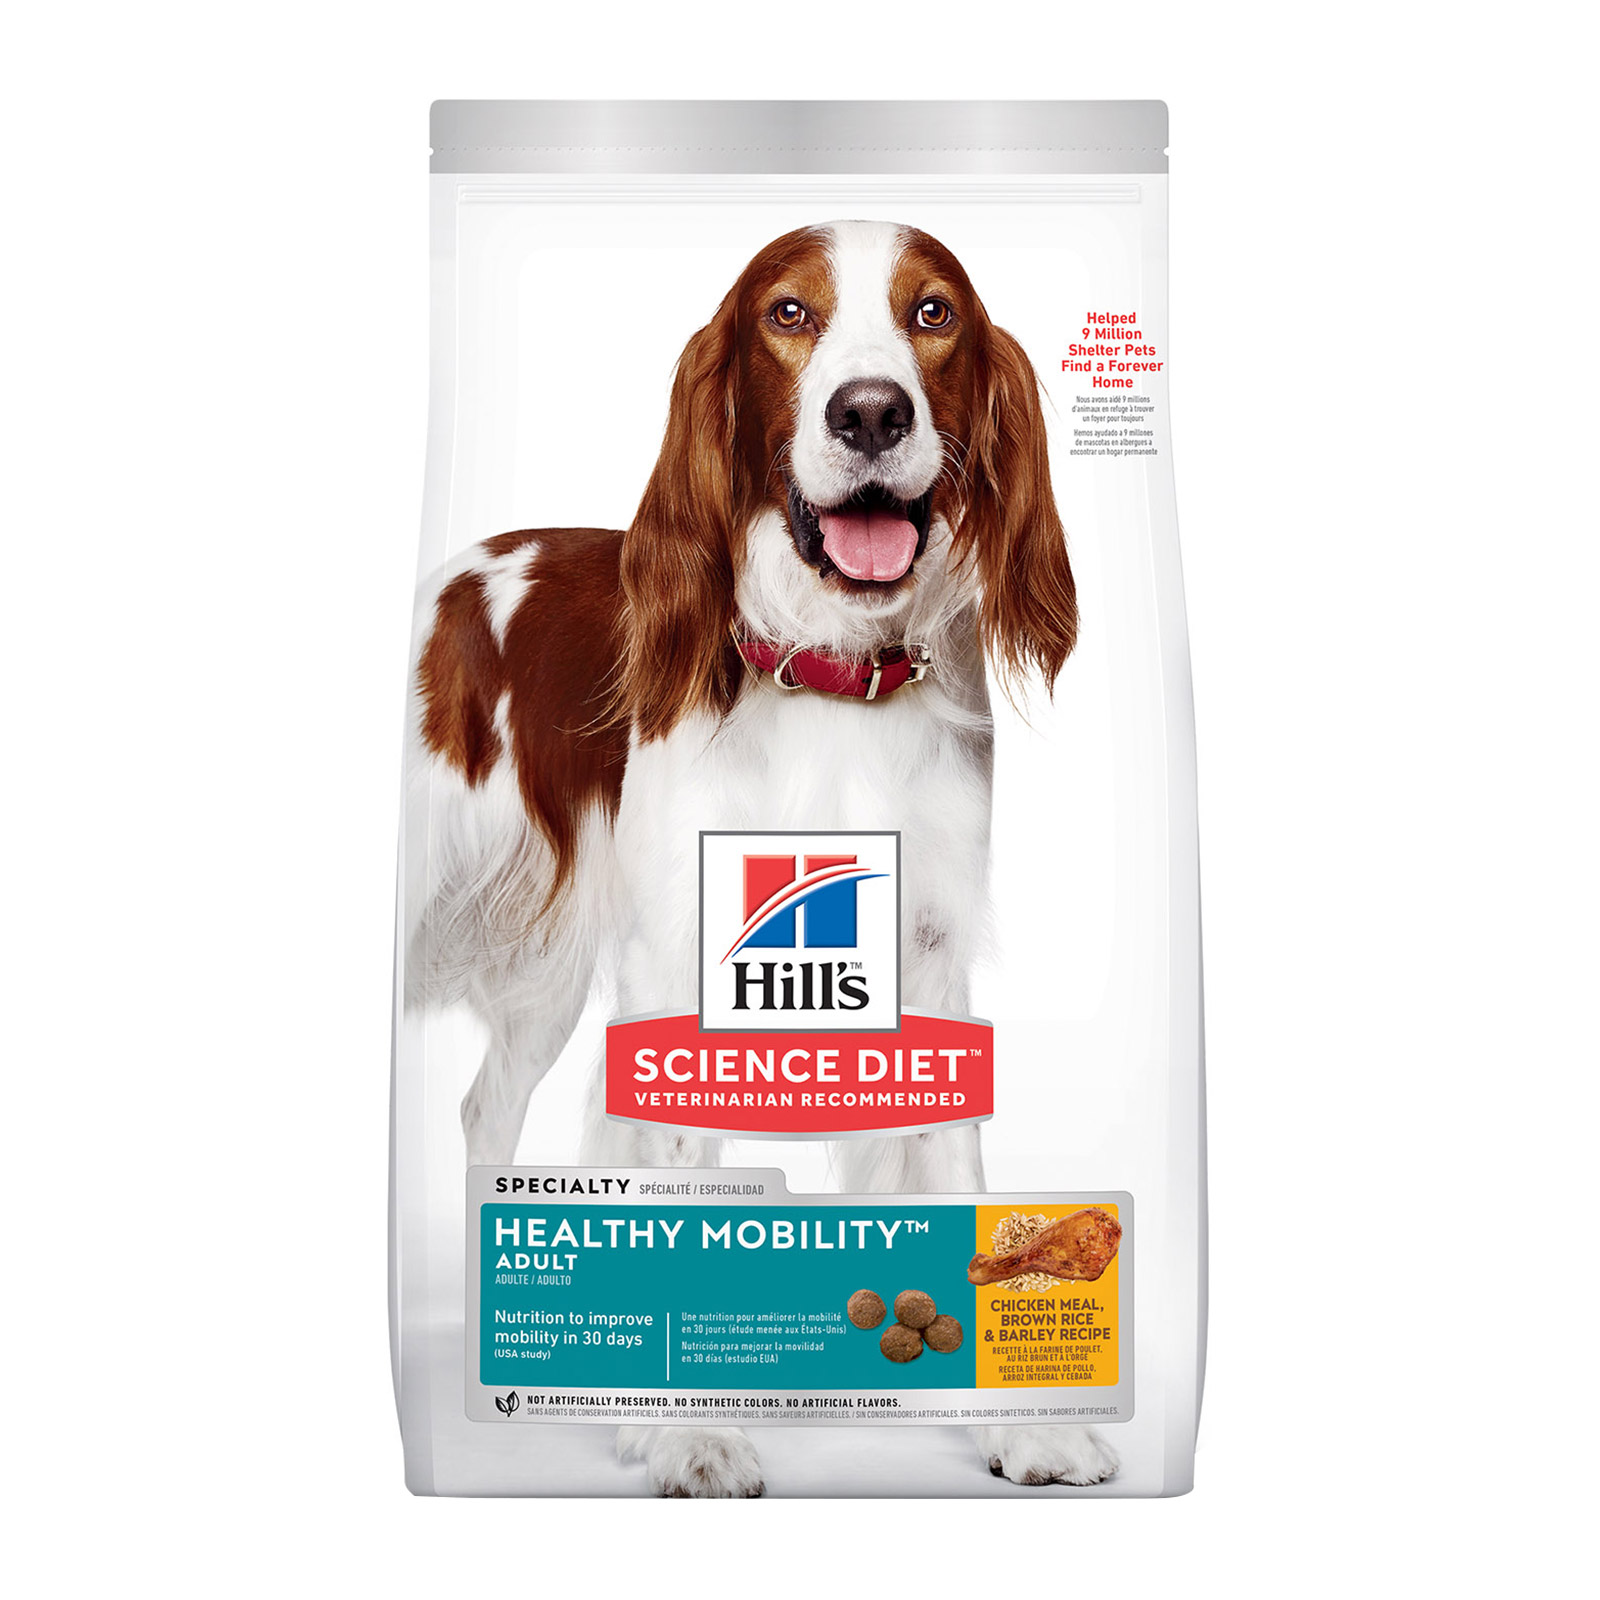 Hill's Science Diet Adult Healthy Mobility Chicken, Rice & Barley Dry Dog Food for Food